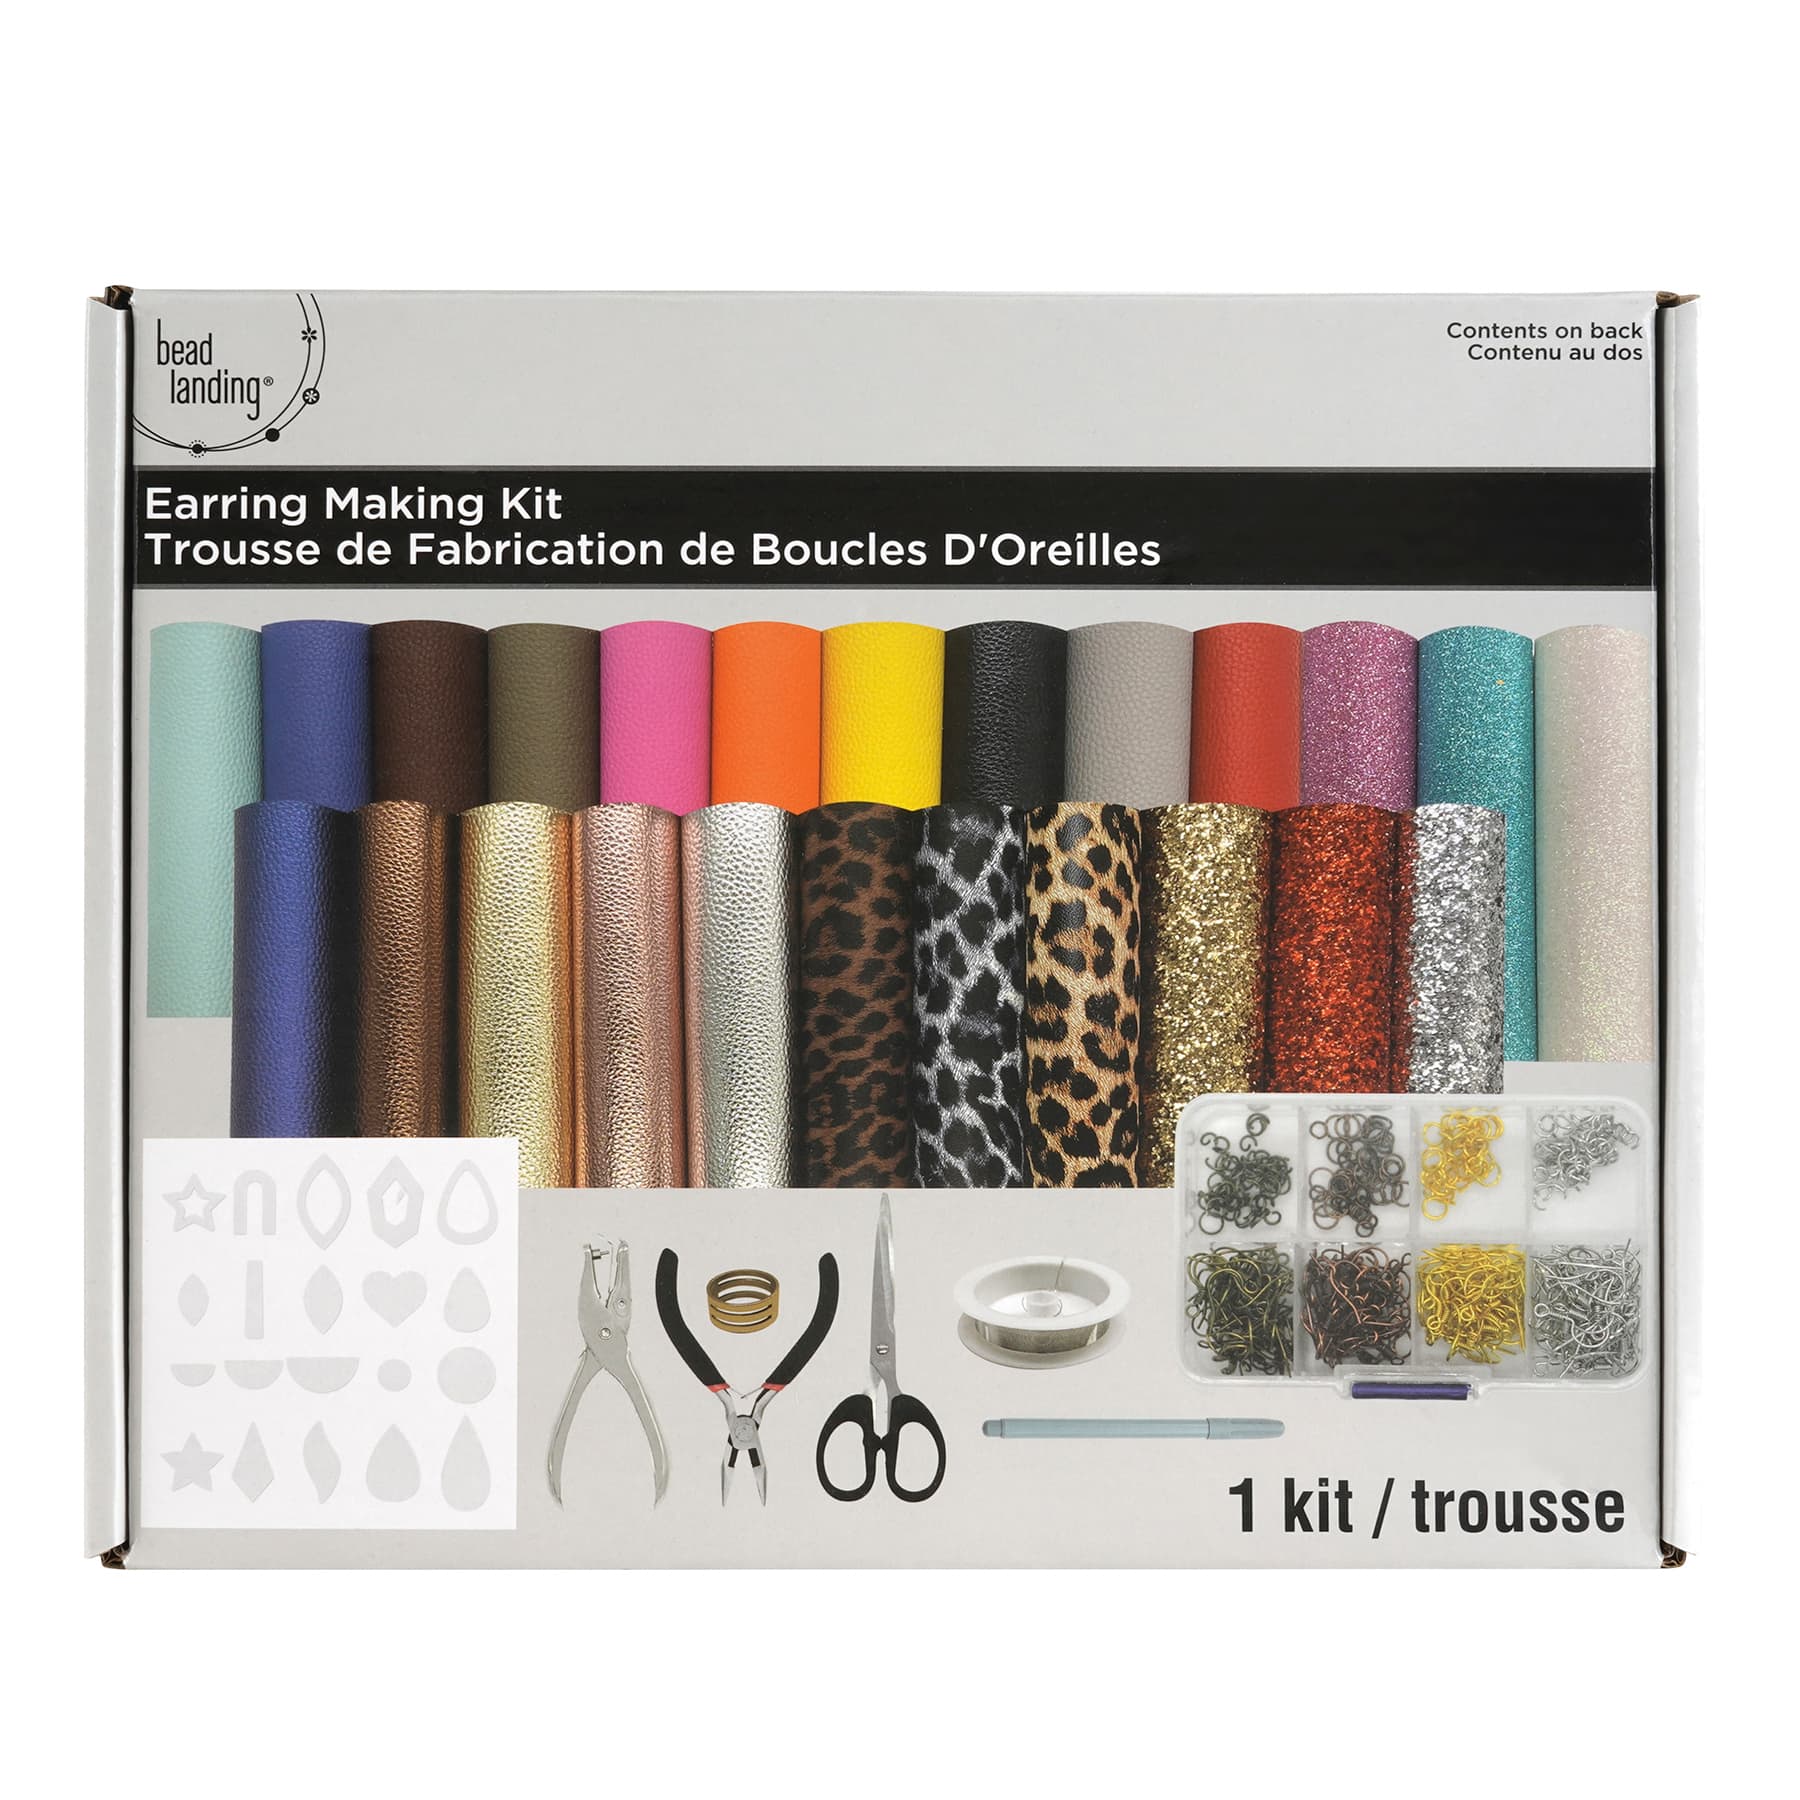 Bead Tool Kit for Jewelry Making & Crafts — Leather Unlimited